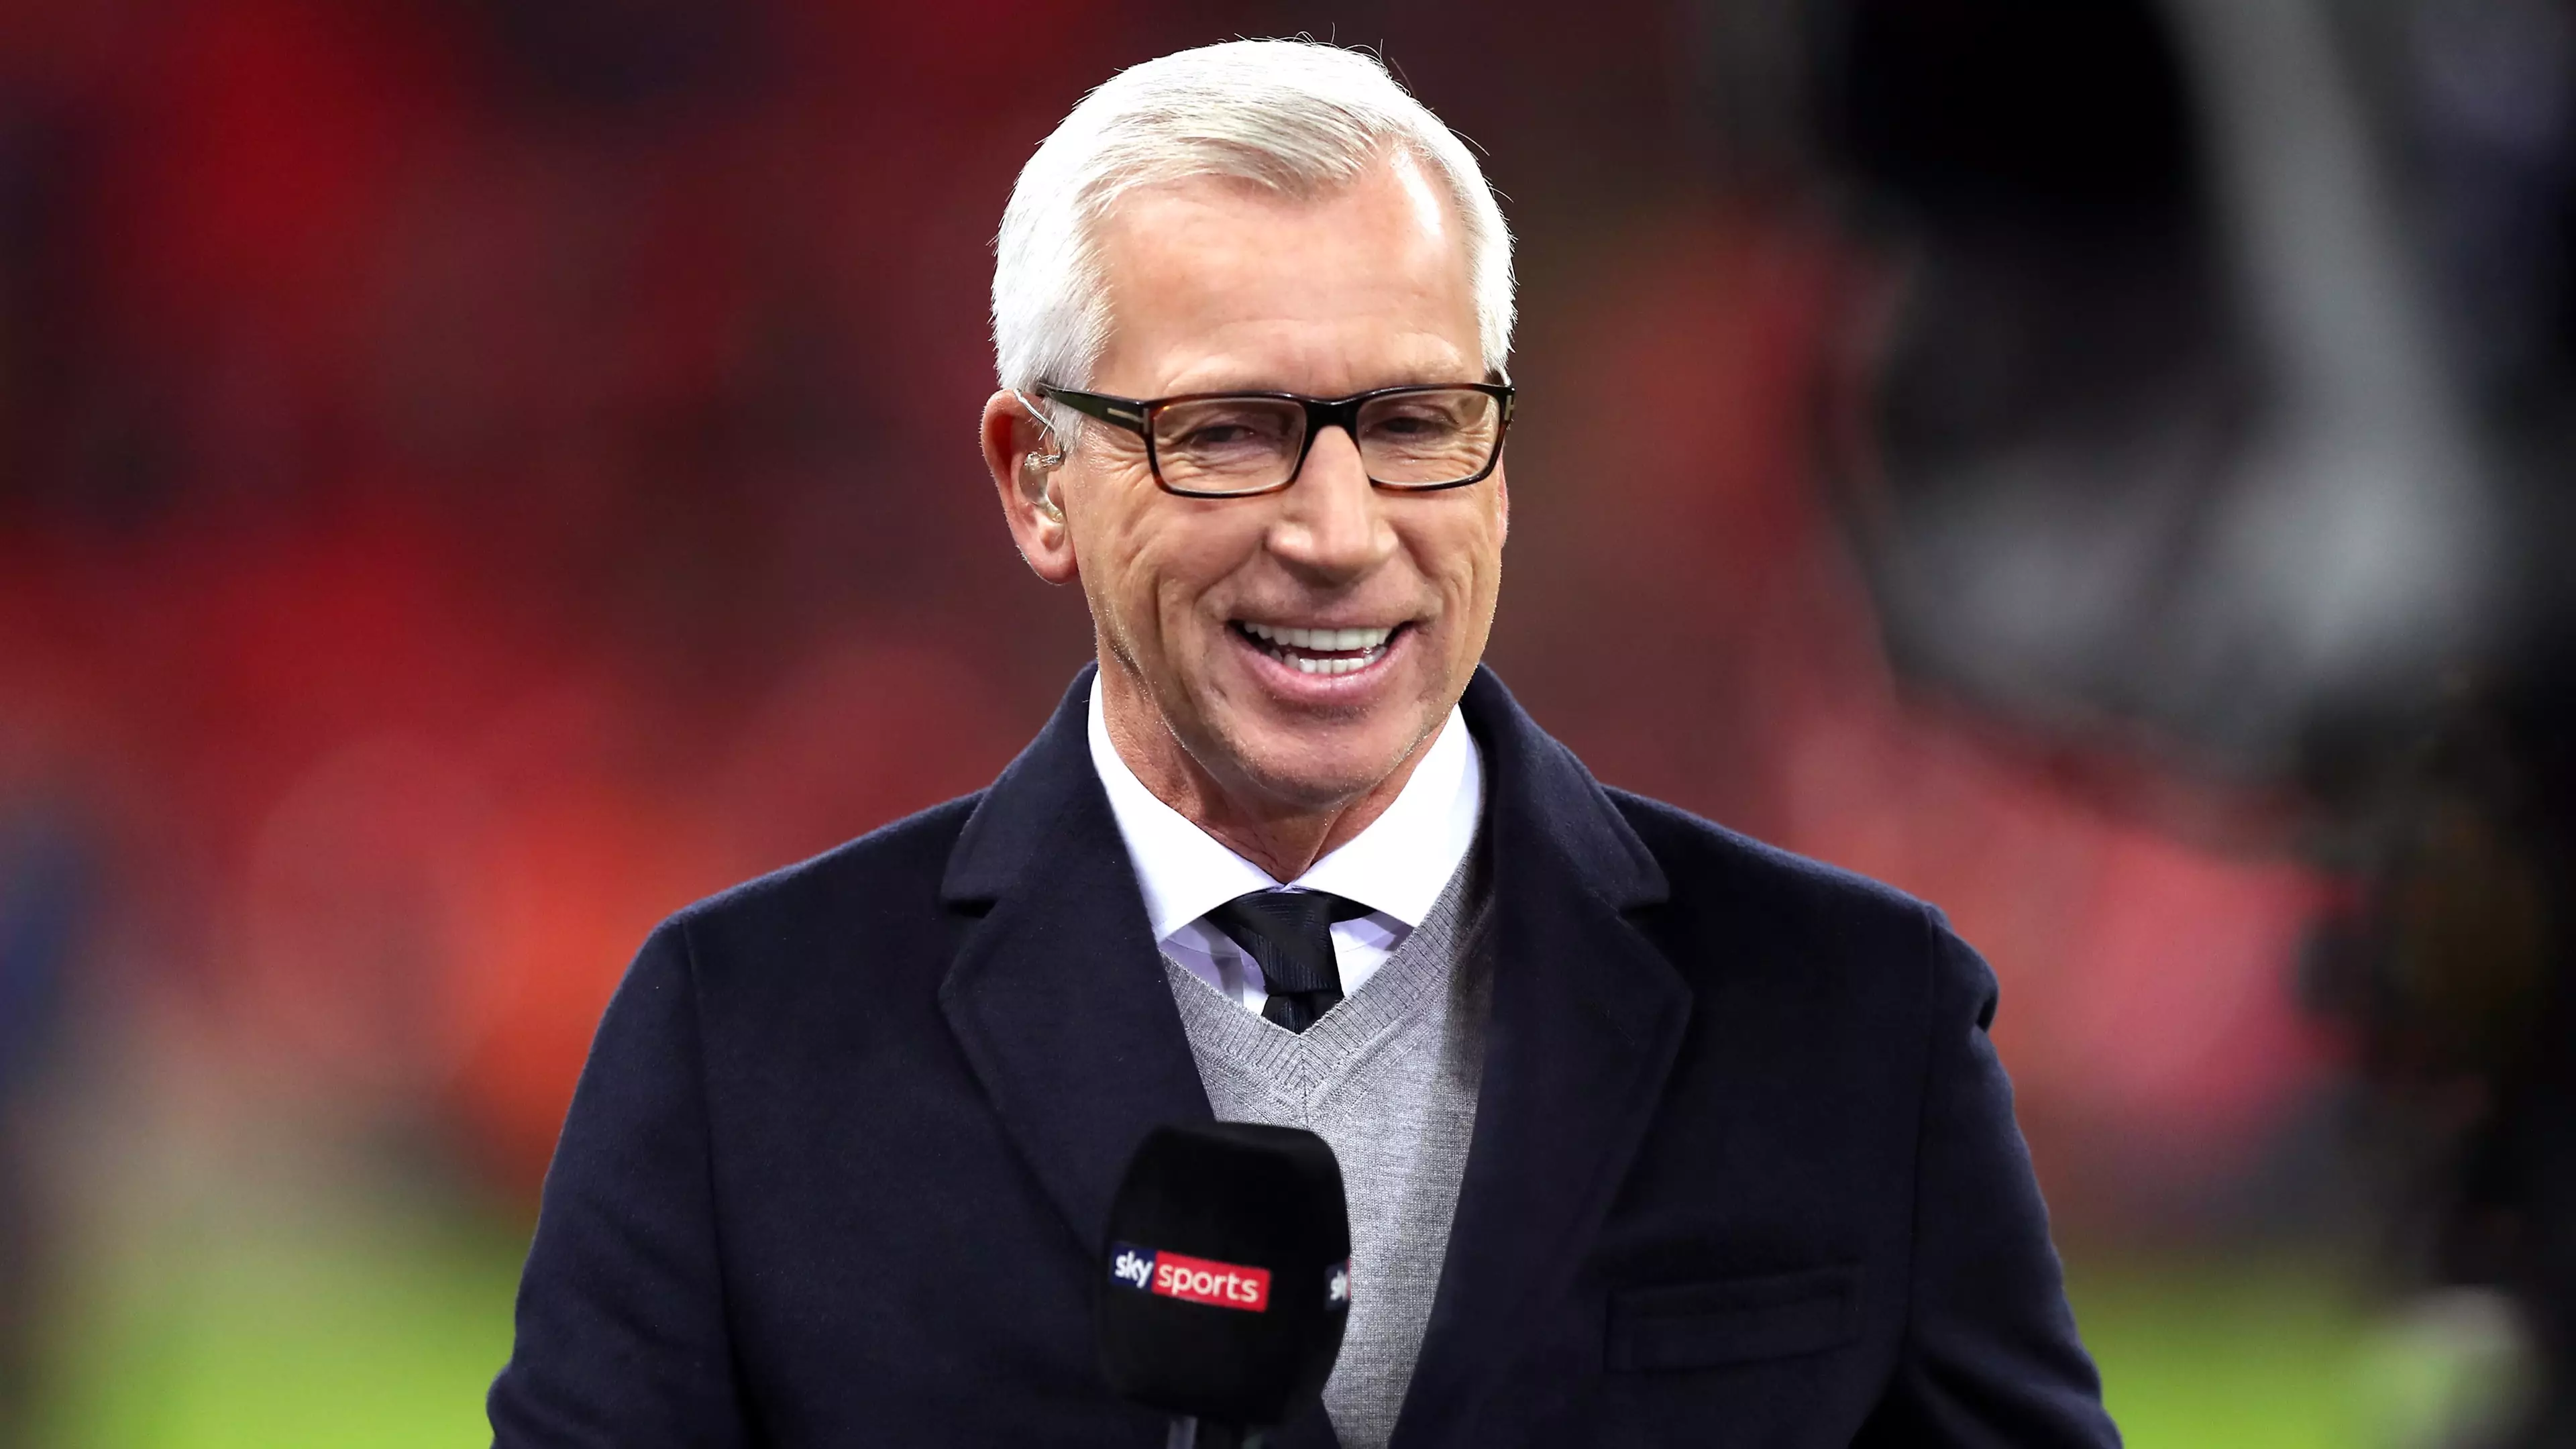 Alan Pardew Set To Become New West Brom Manager